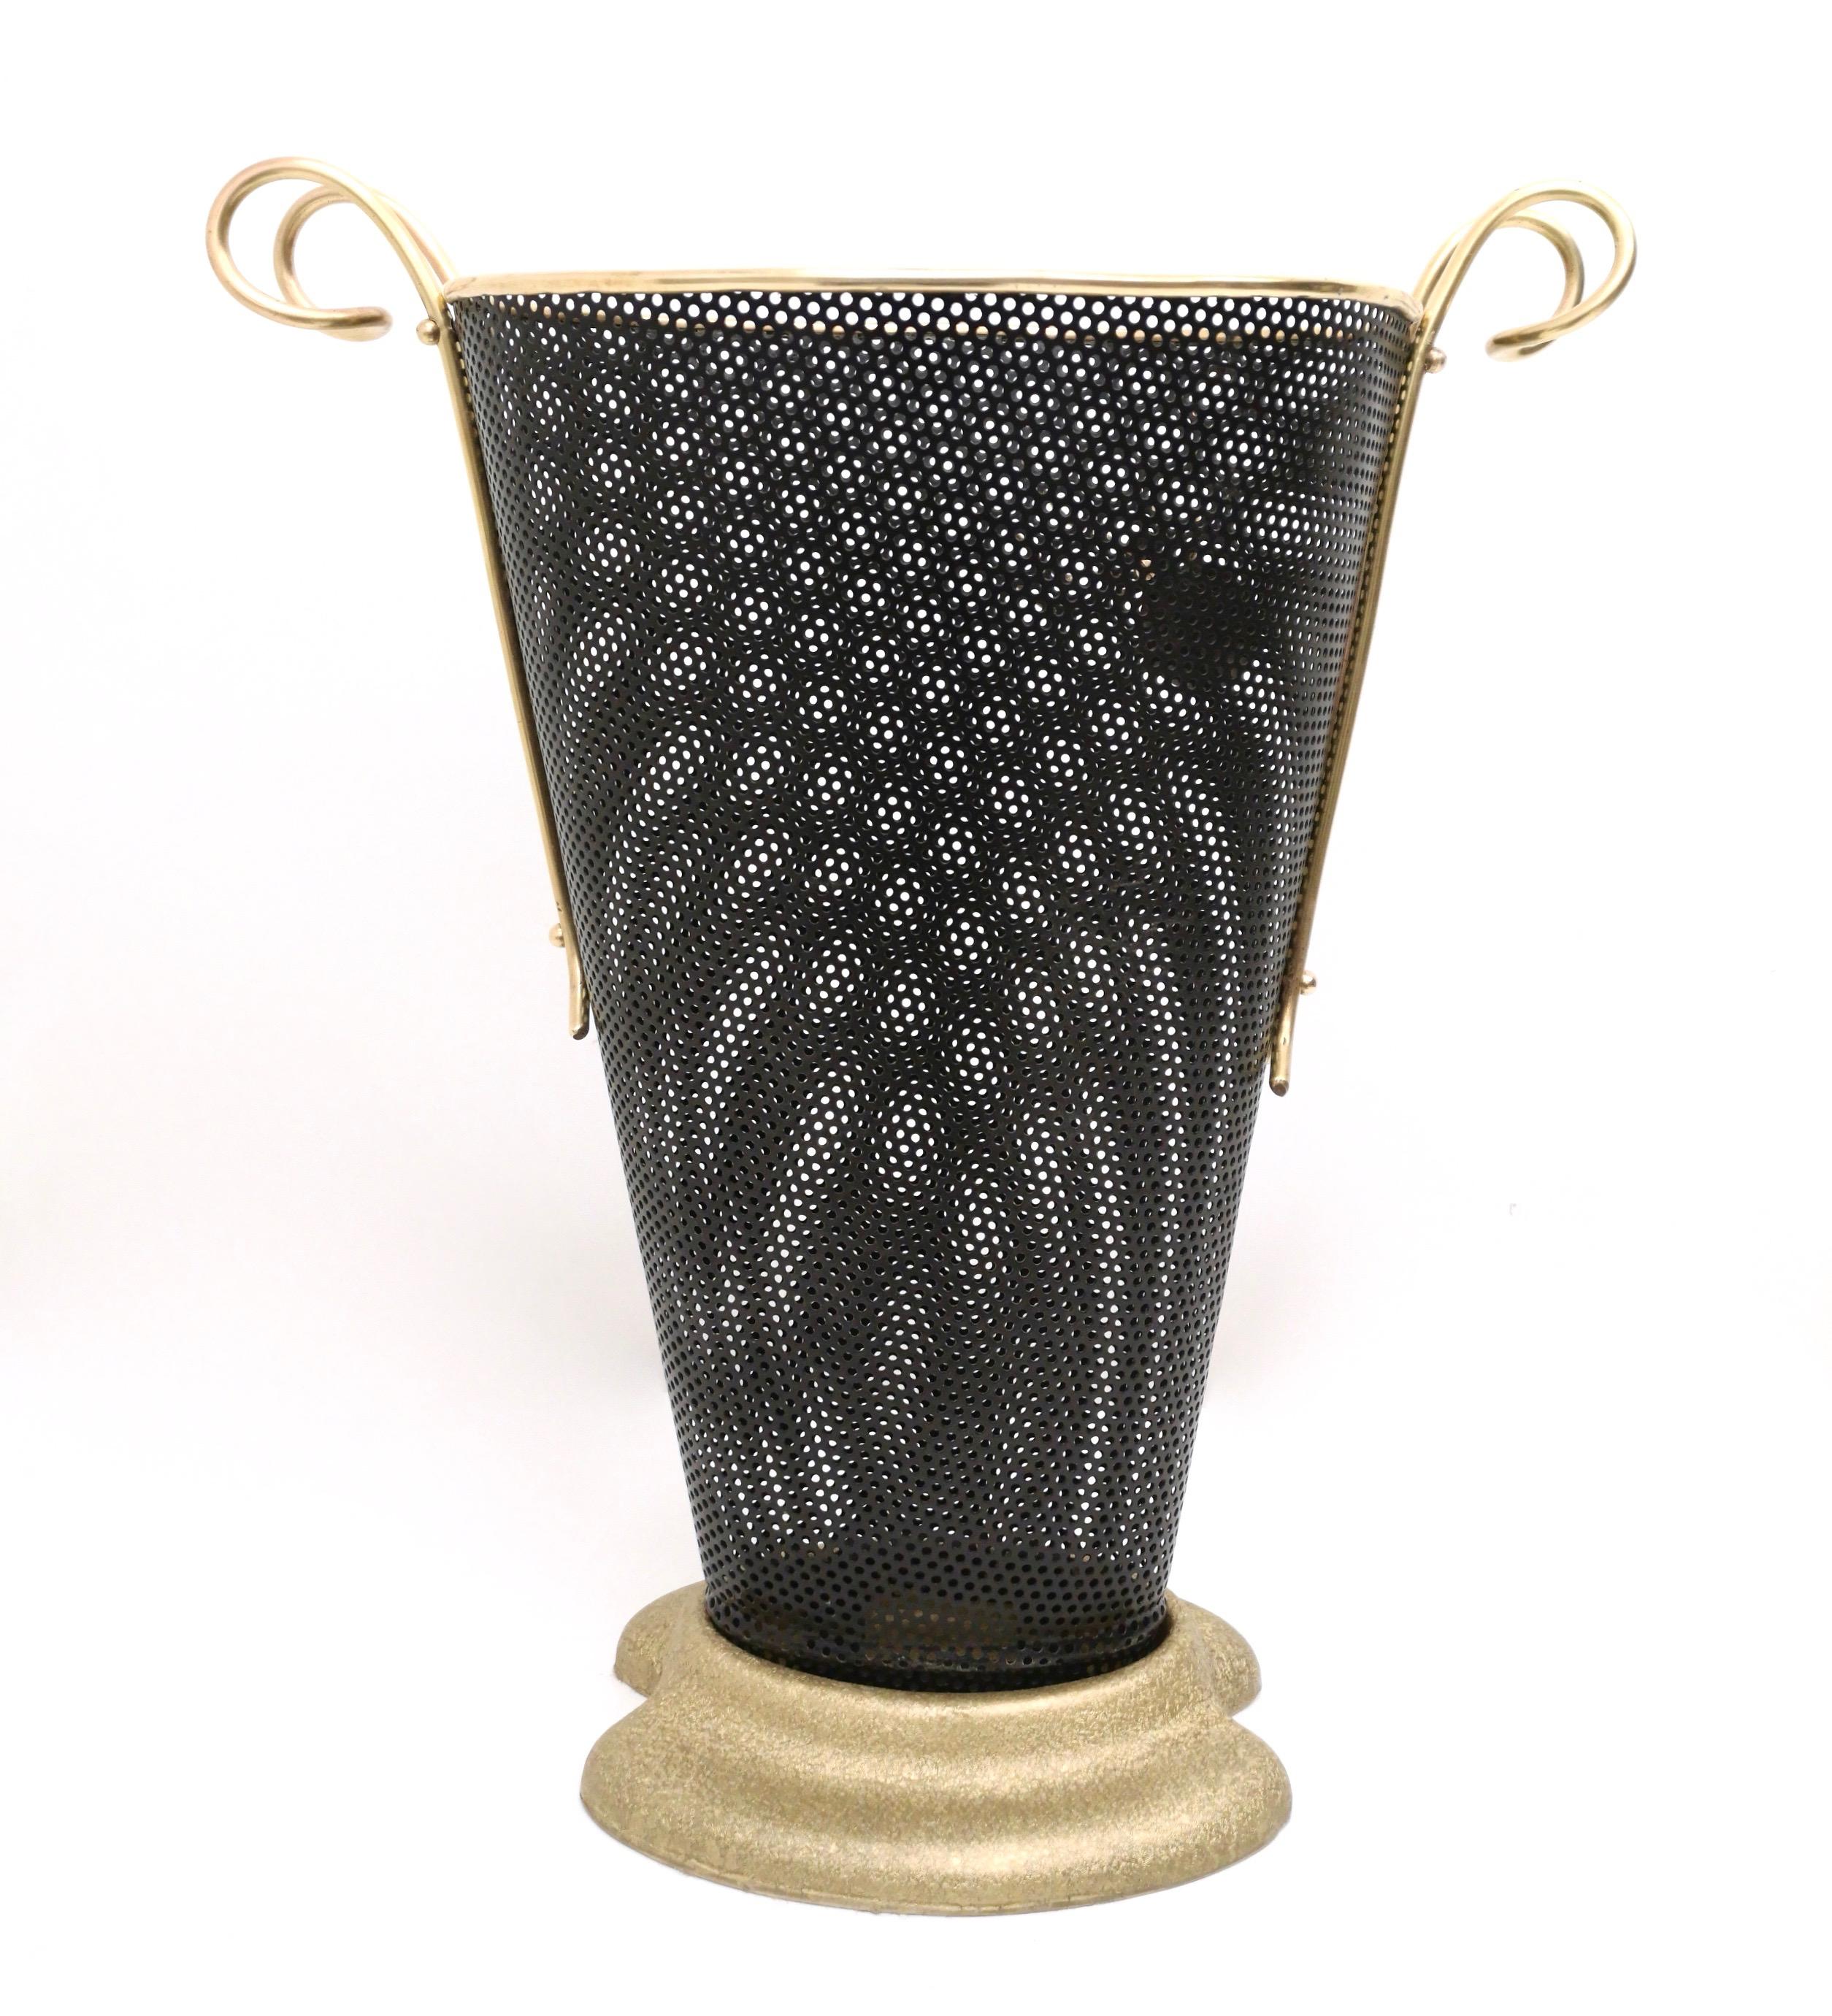 Italian Vintage Black Varnished Metal Umbrella Stand with a Brass Spider, Italy